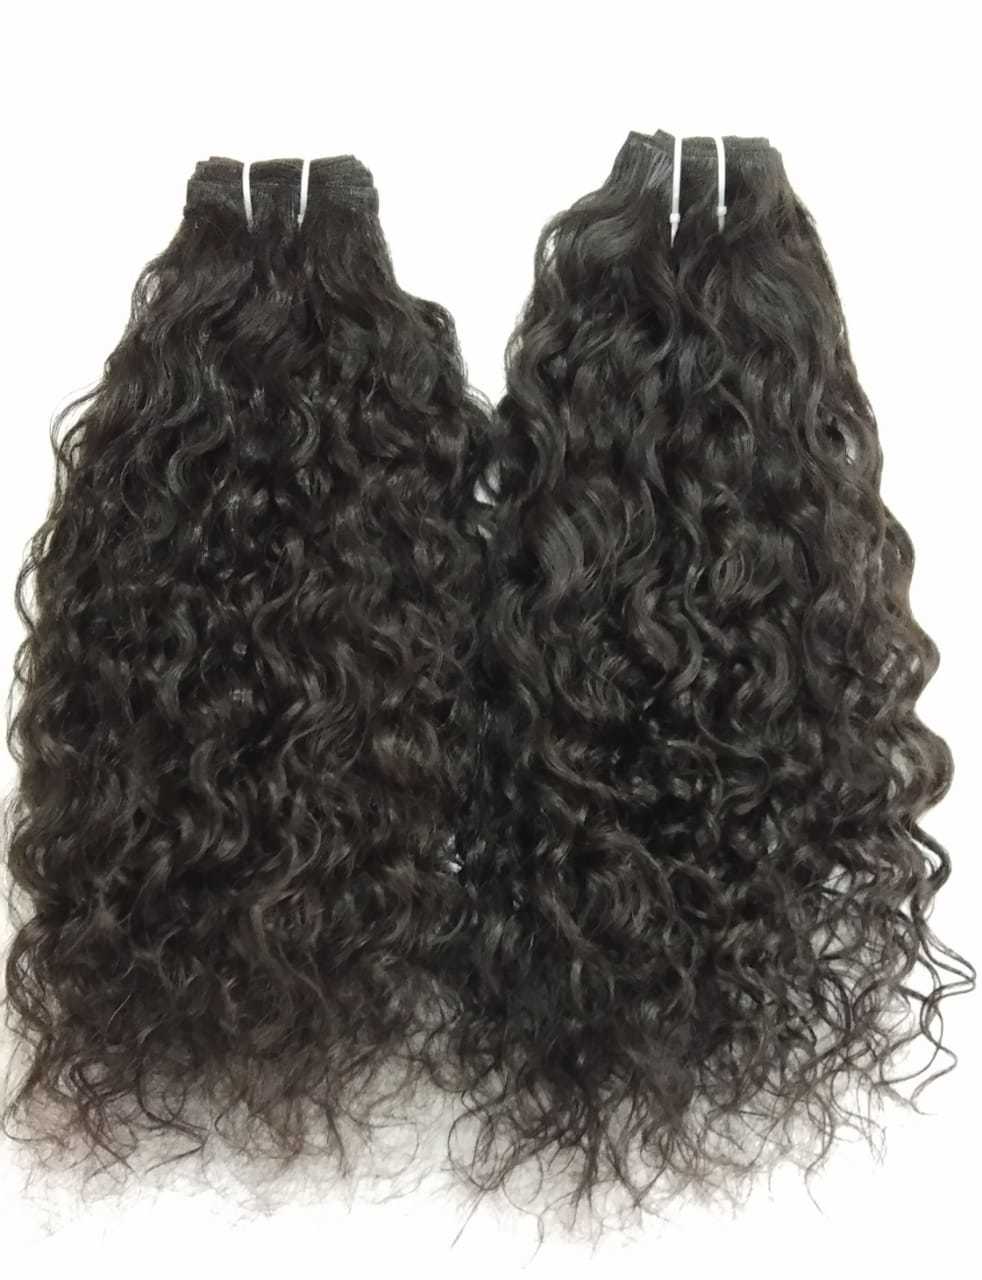 Wholesale Price Top Quality Virgin Human Hair remy Curly Human Hair